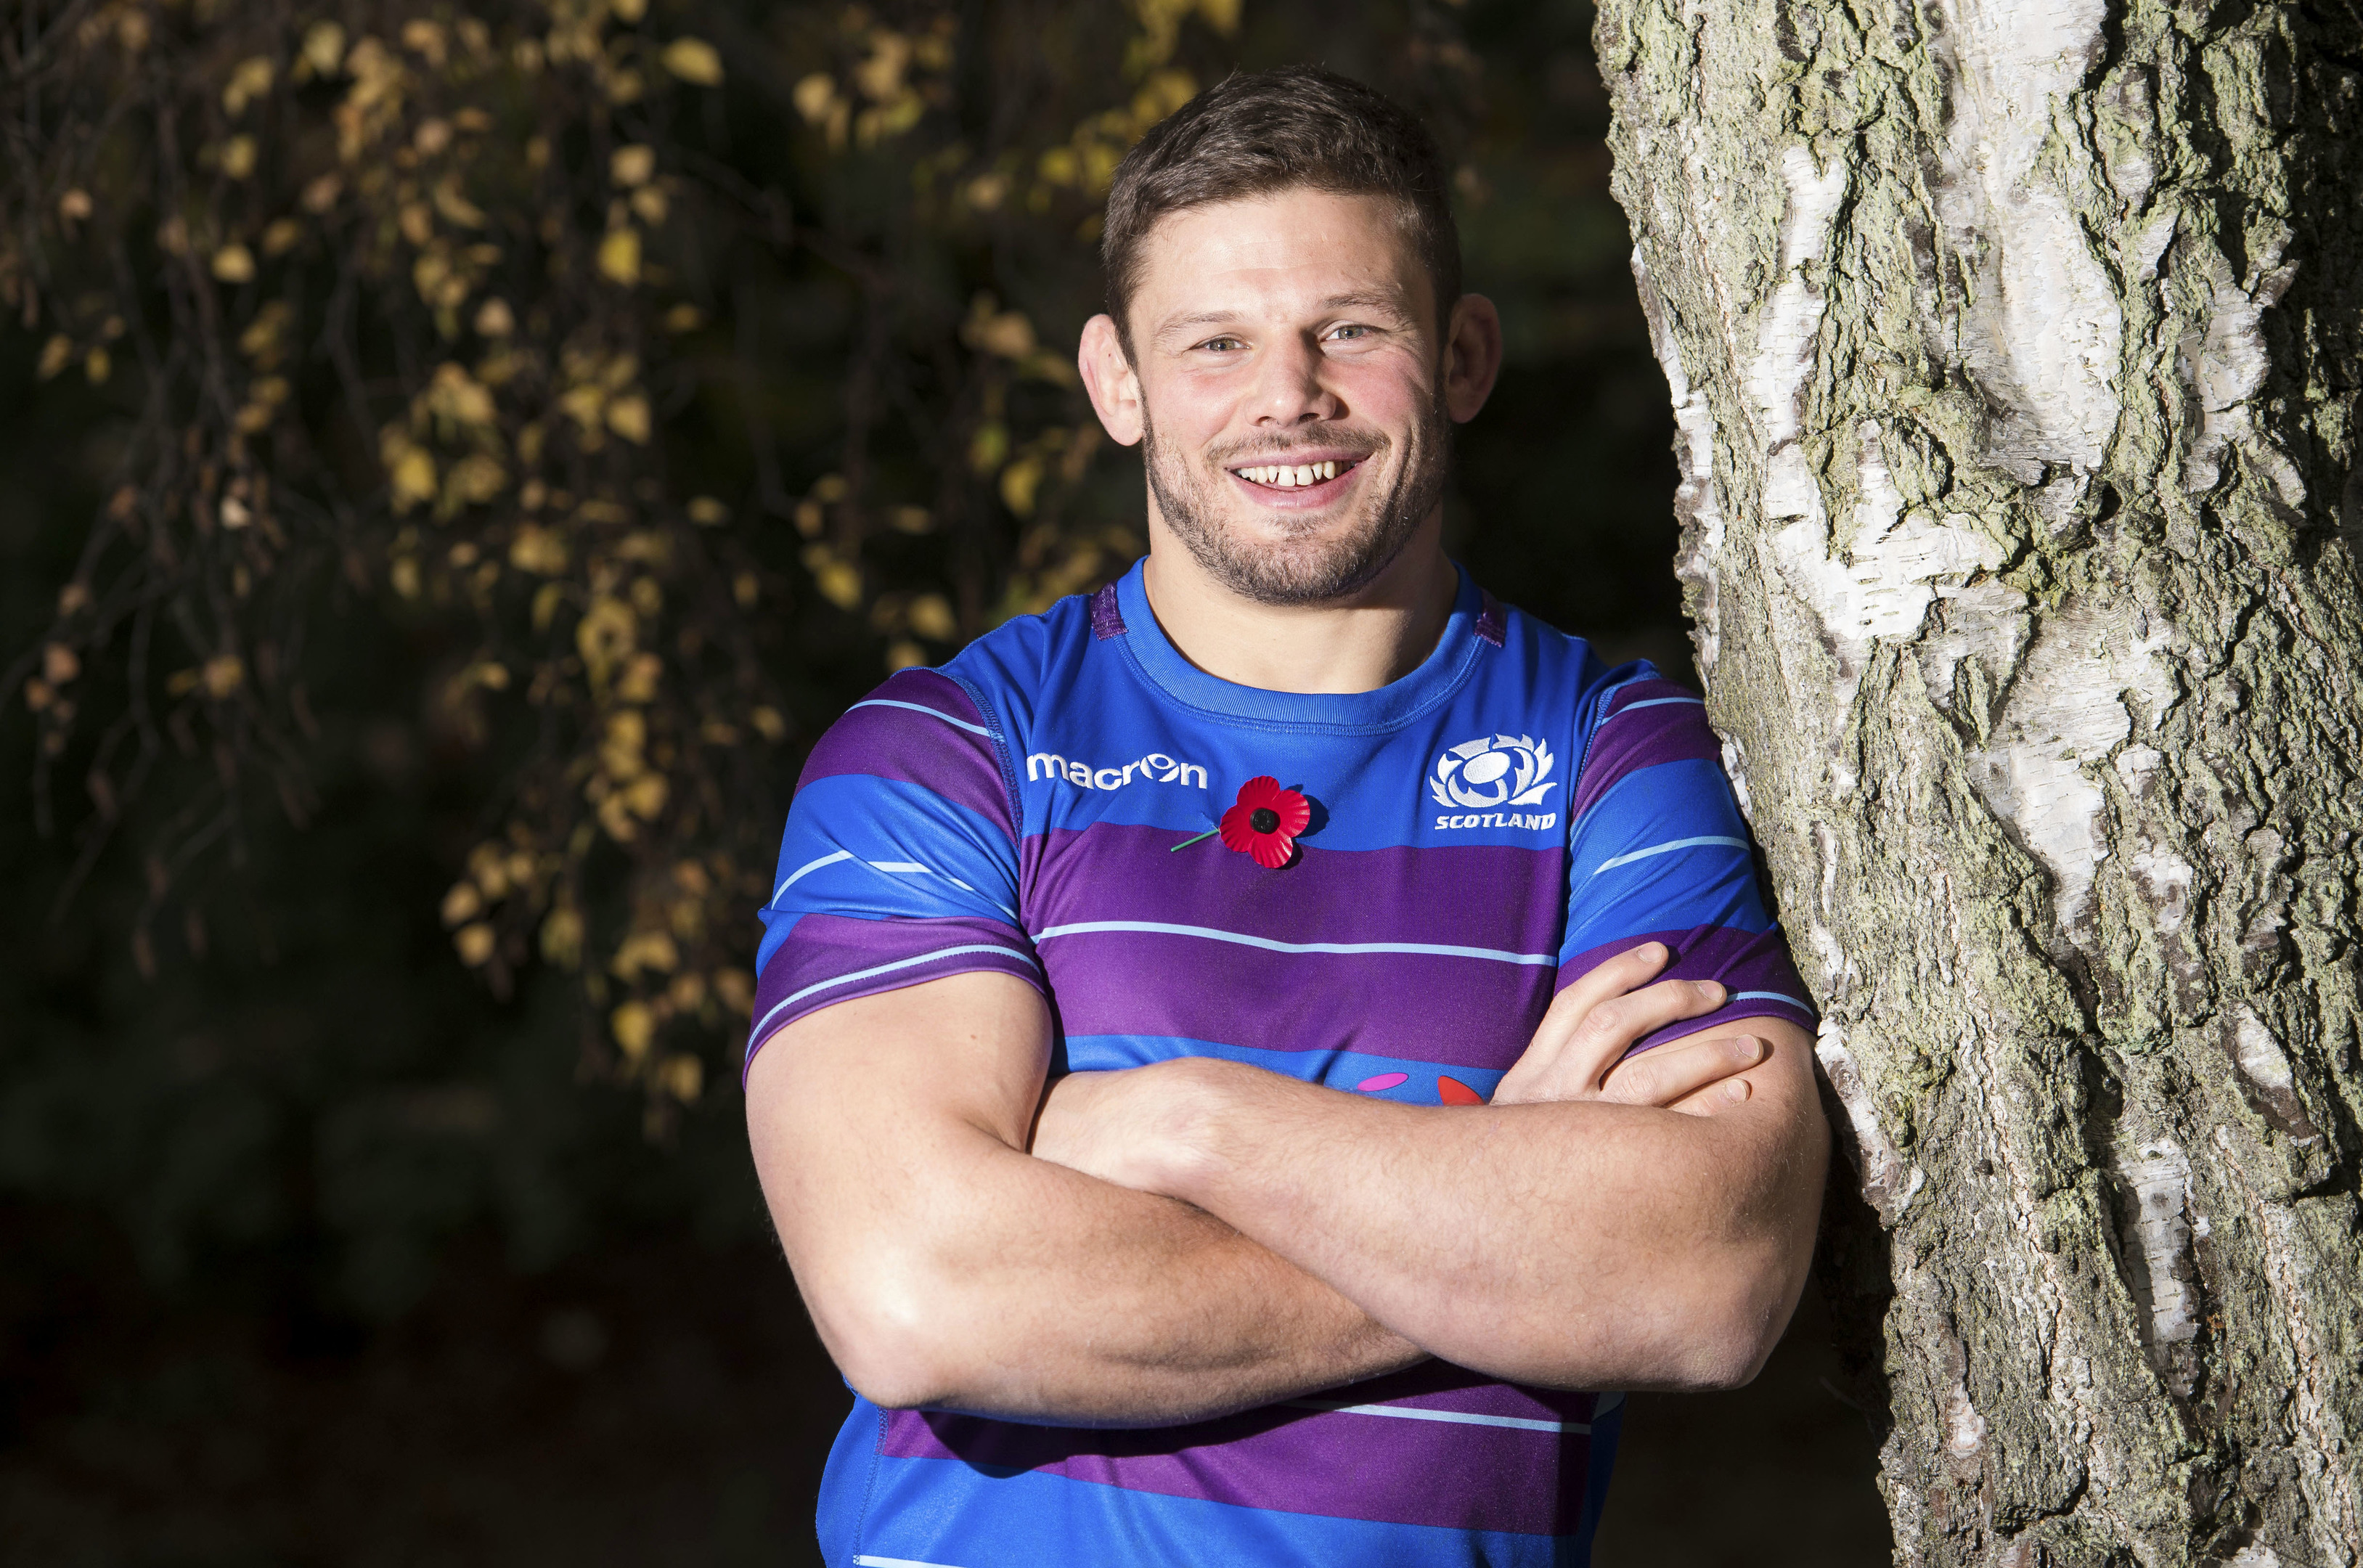 Ross Ford has an additional key role against Australia in his 100th cap for Scotland.